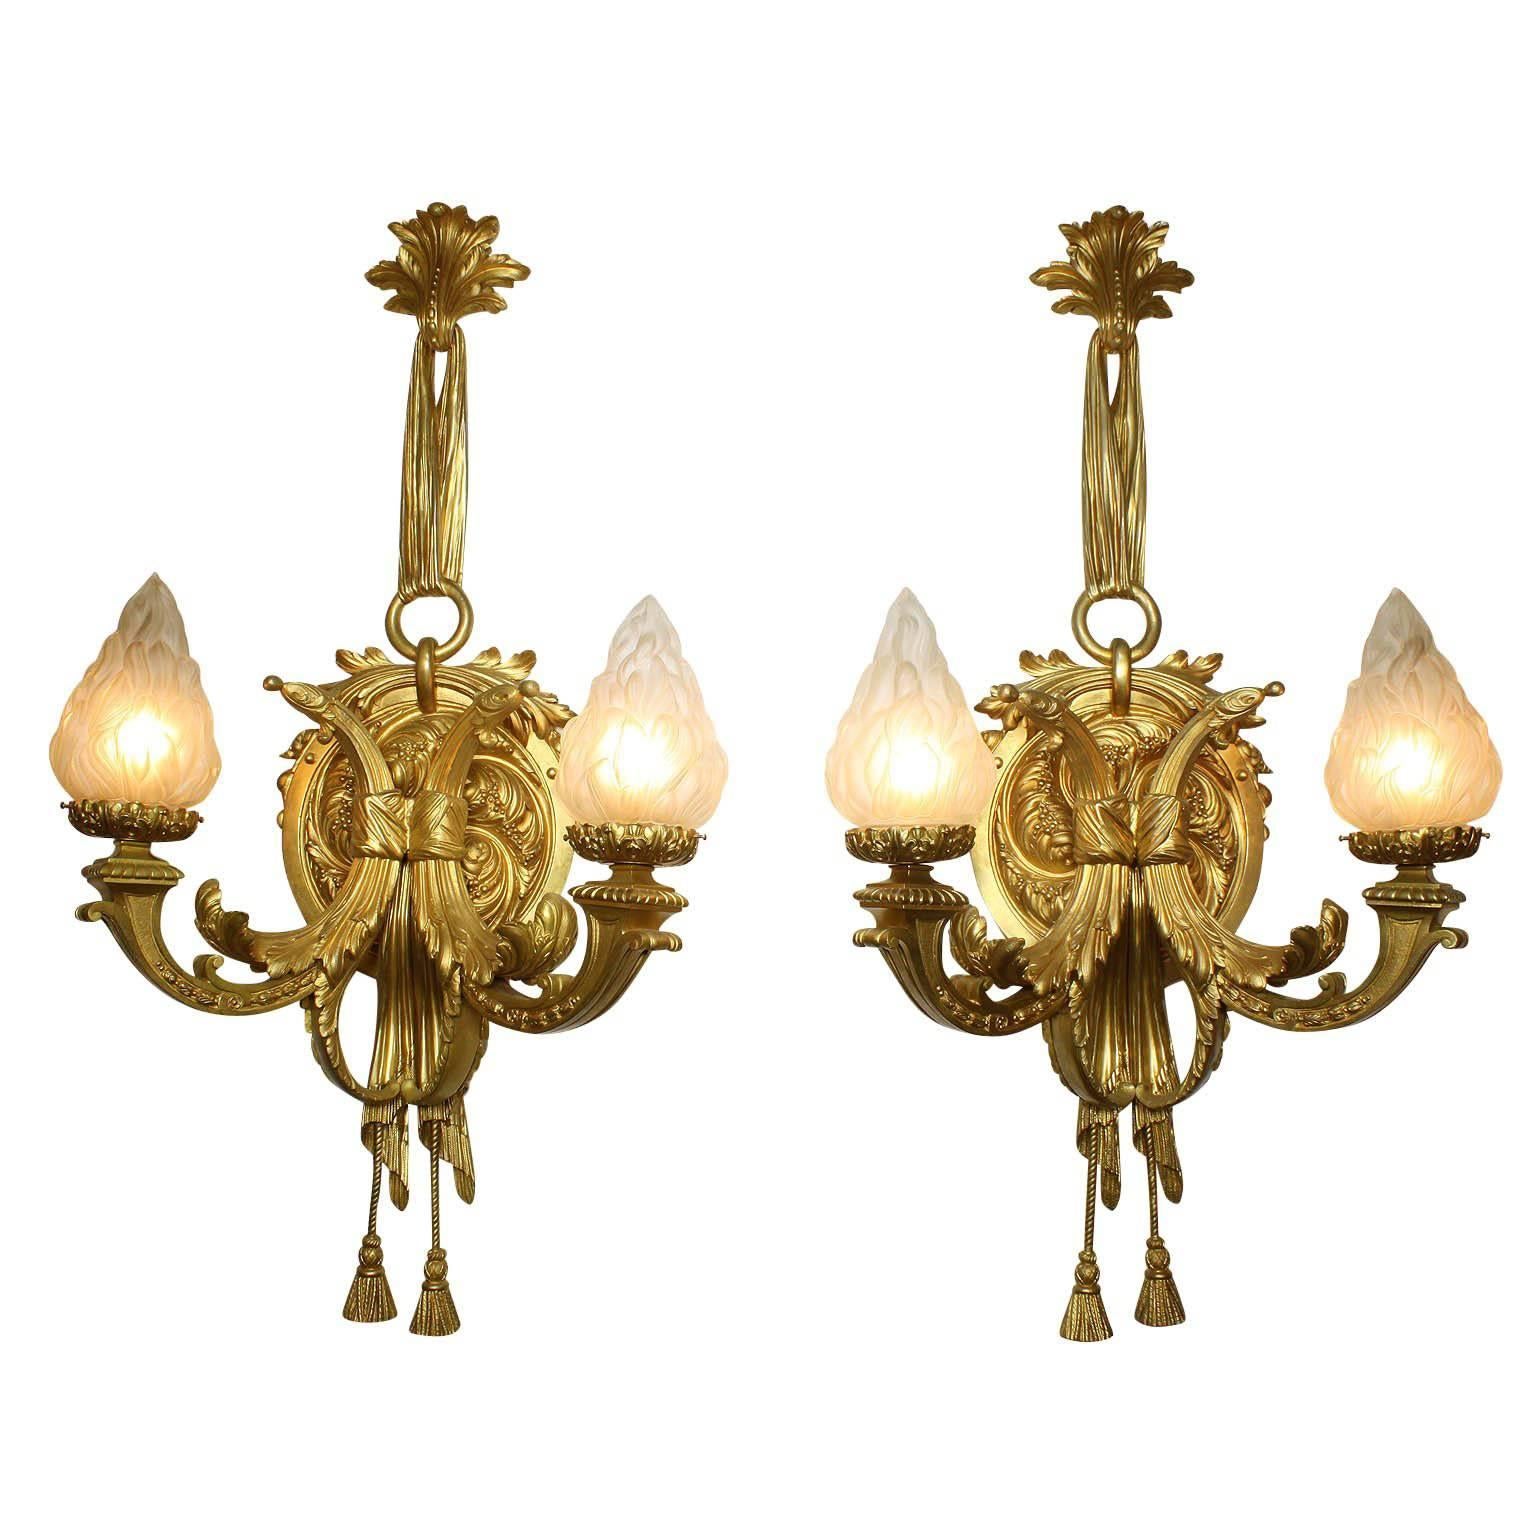 Large Pair of French 19th-20th Century Louis XVI Style Gilt-Bronze Wall Sconces For Sale